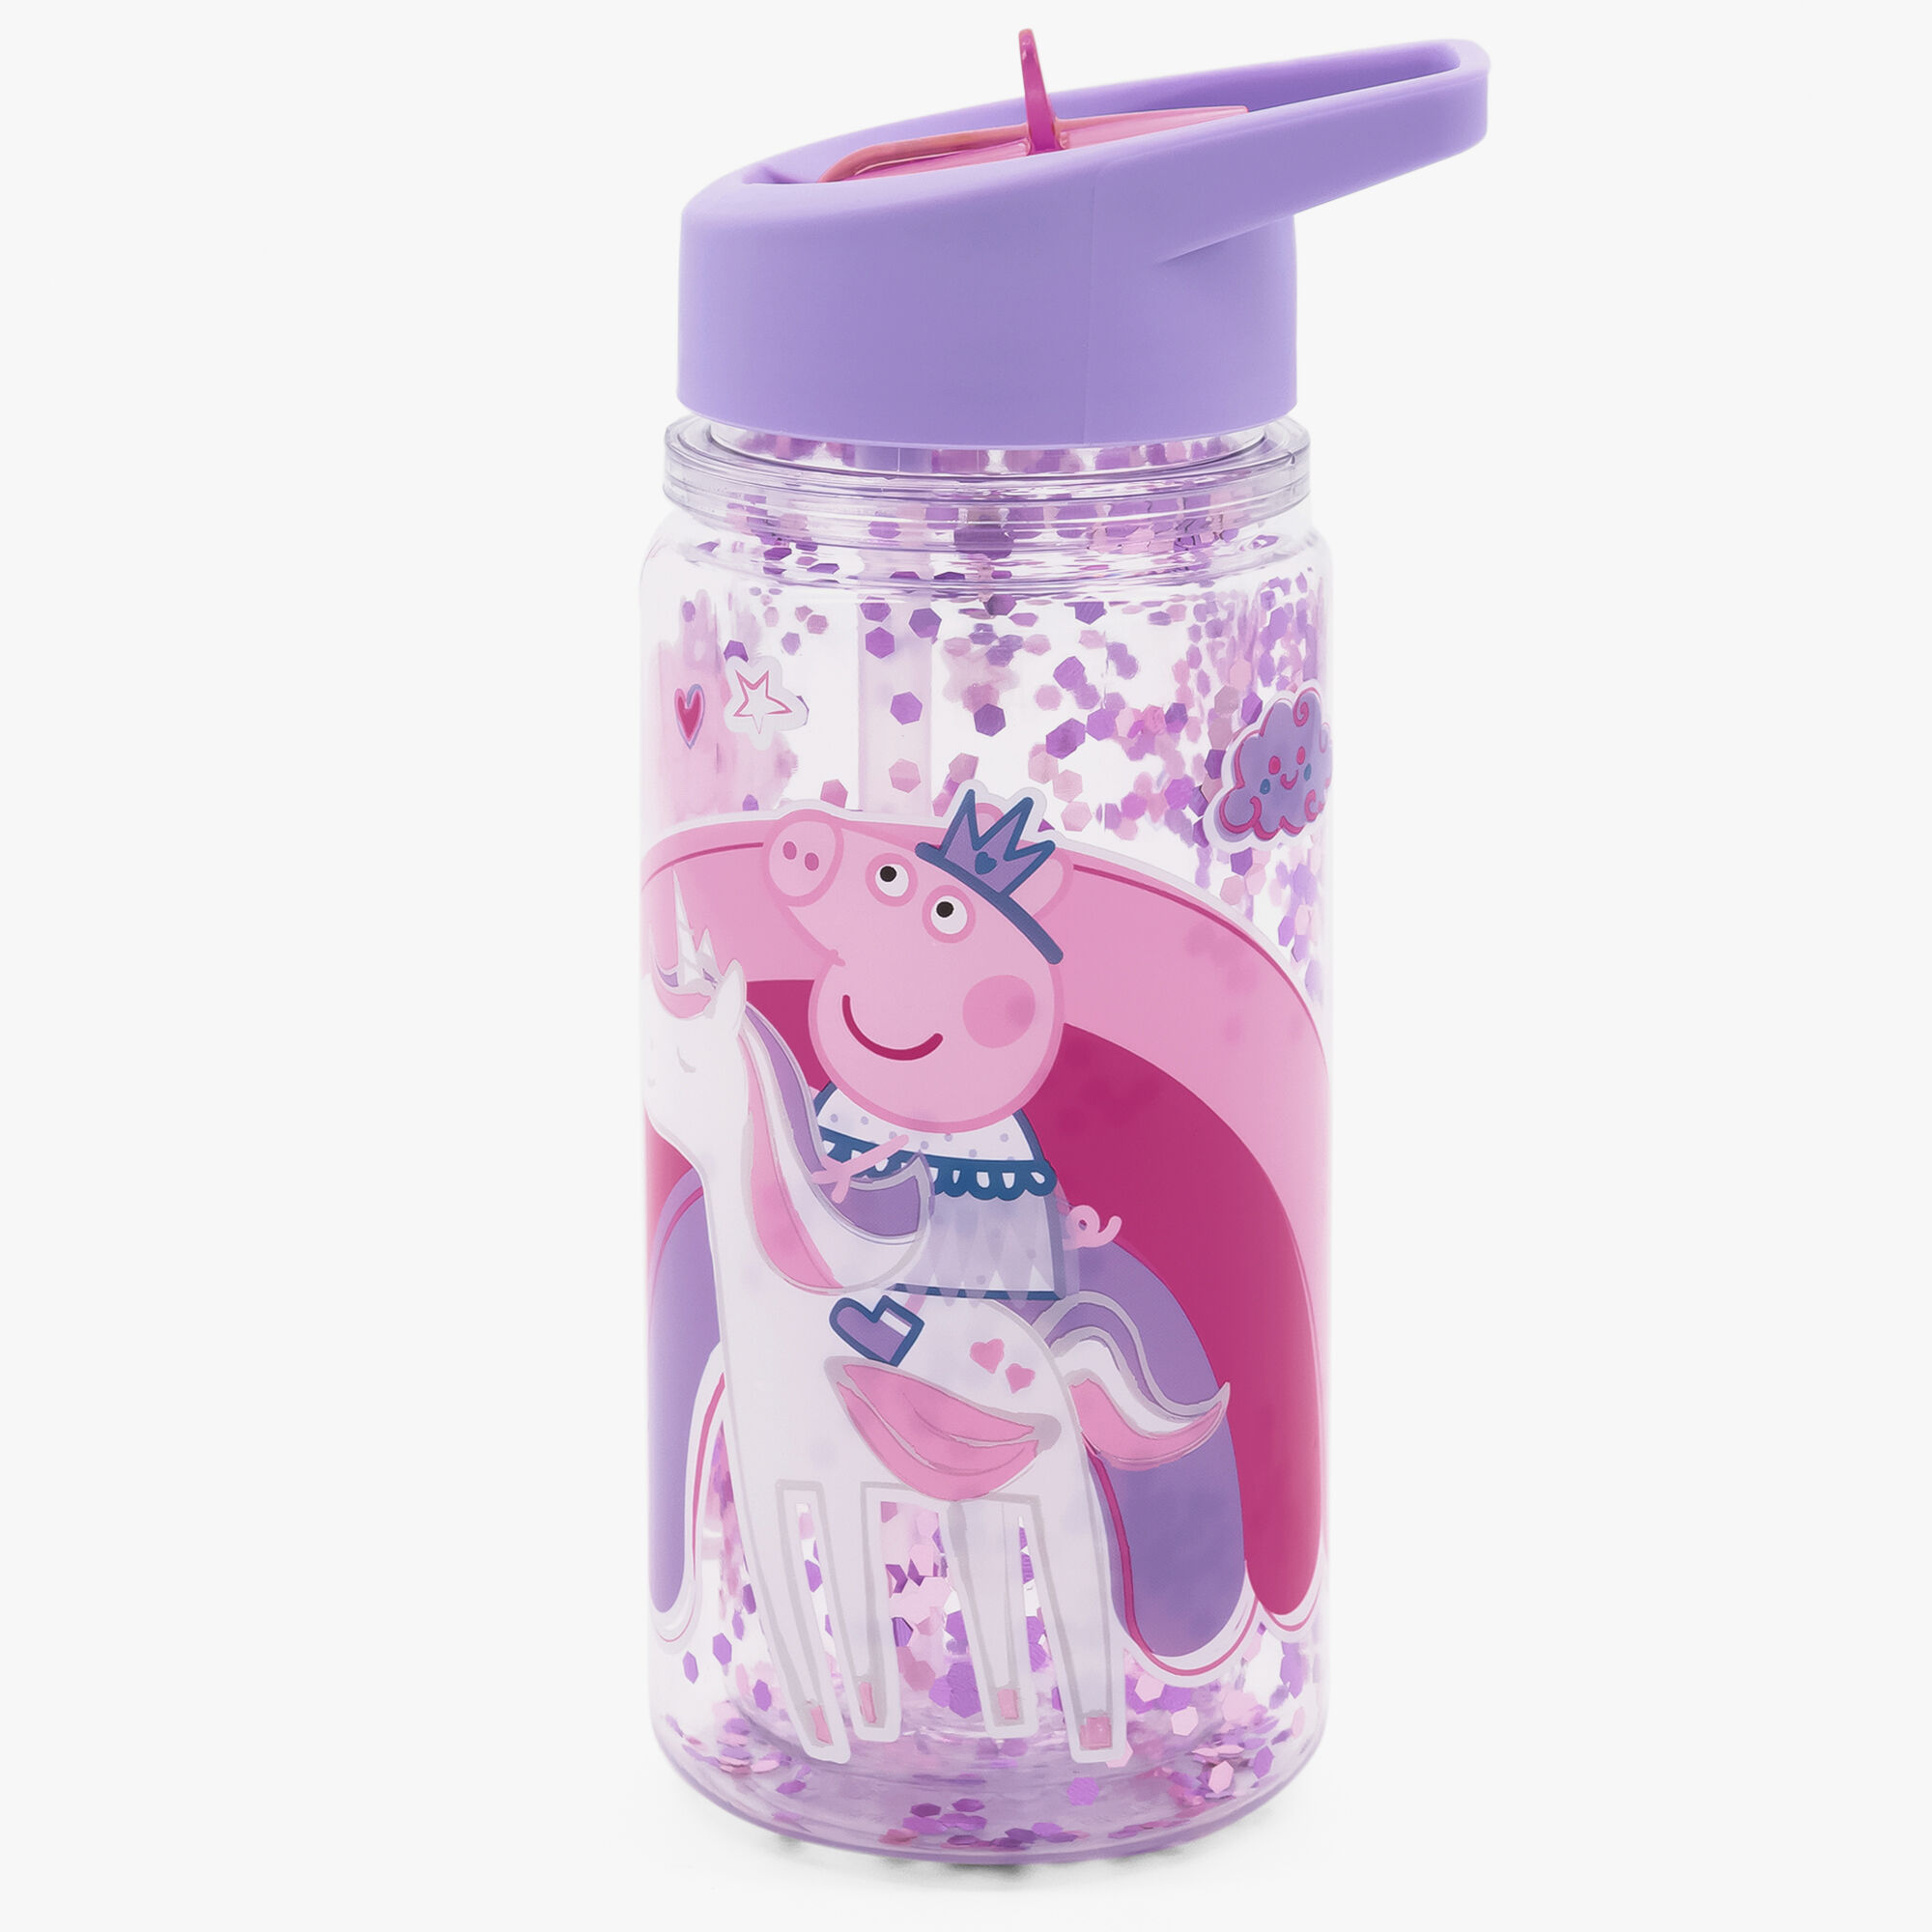 View Claires Peppa Pig Unicorn Water Bottle Purple information